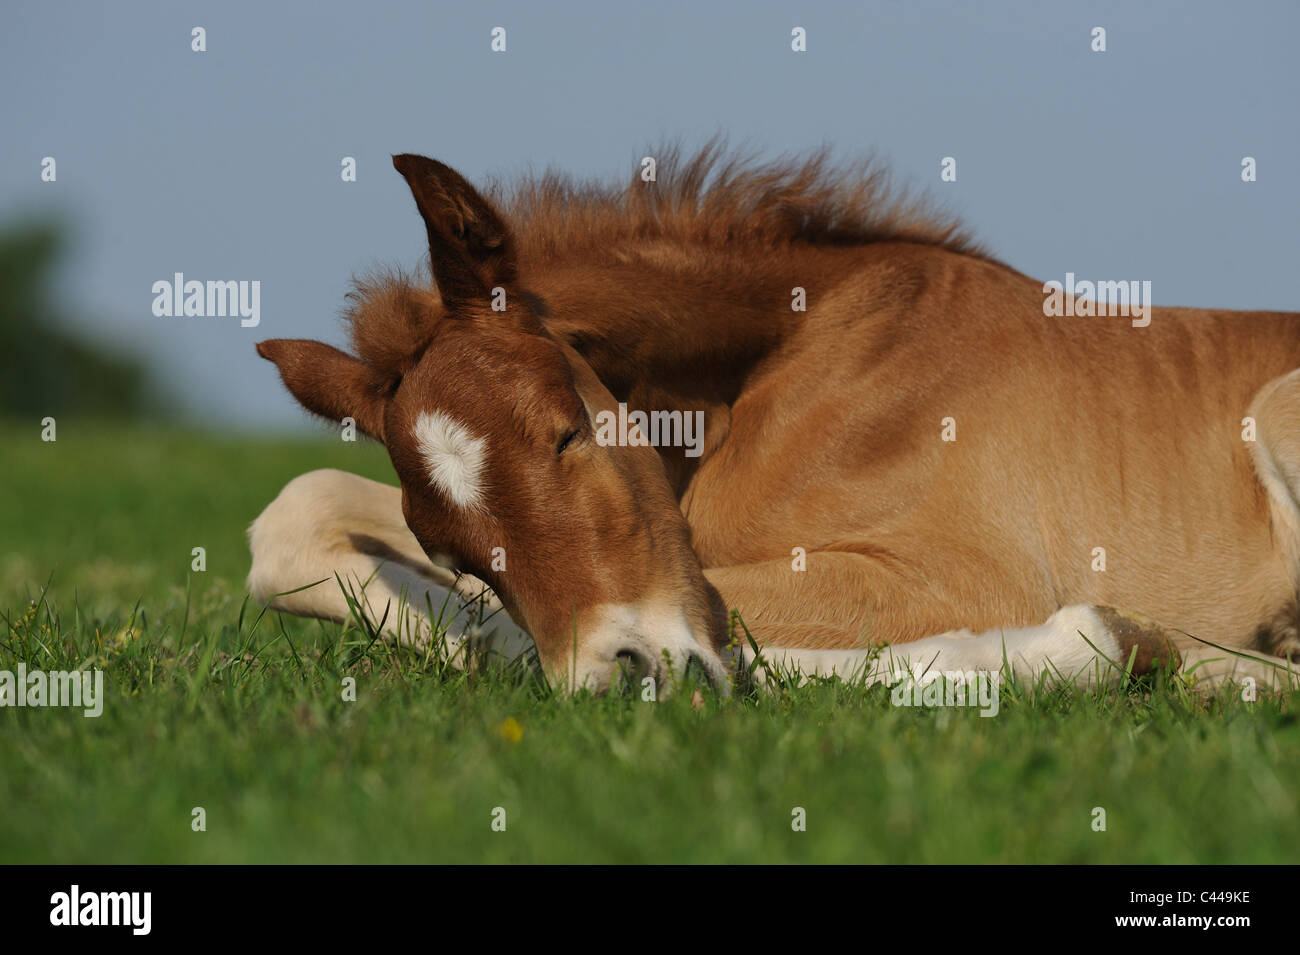 Curly Horse Equus Ferus Caballus Foal Sleeping On A Meadow Stock Photo Alamy,Thai Sweet Chili Sauce Brand